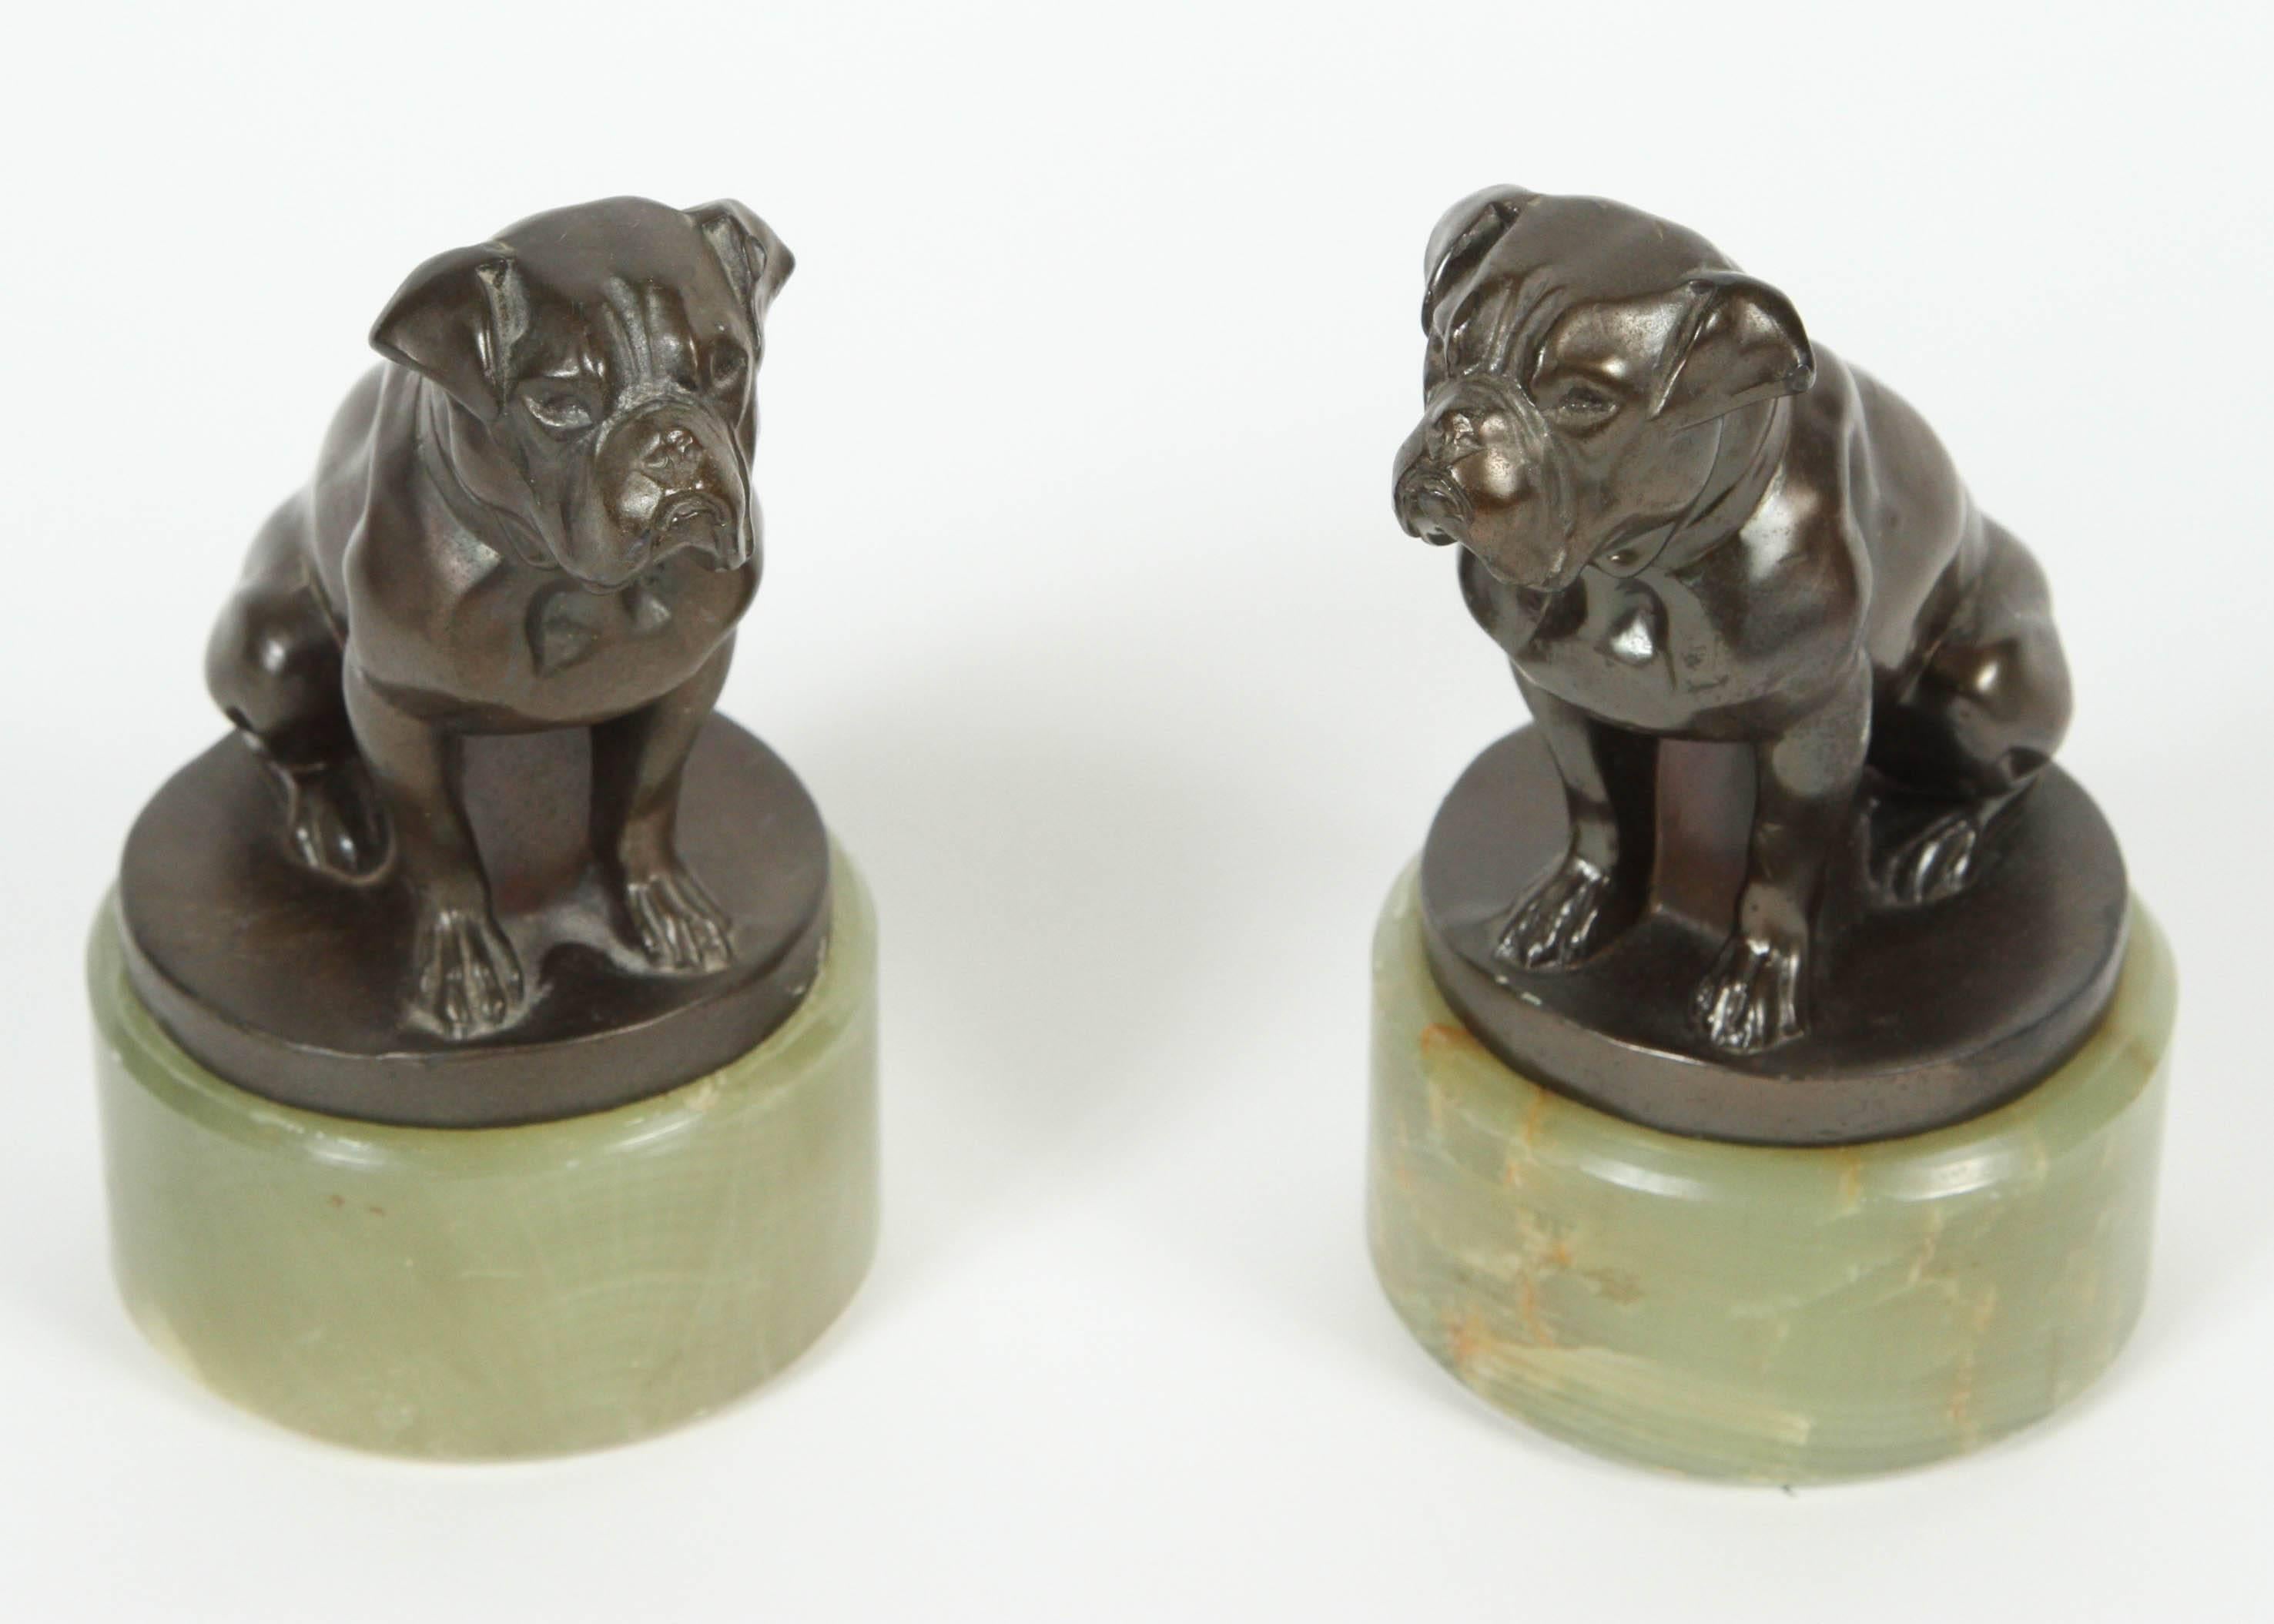 Vintage bookends of bronze English bulldogs on marble base.